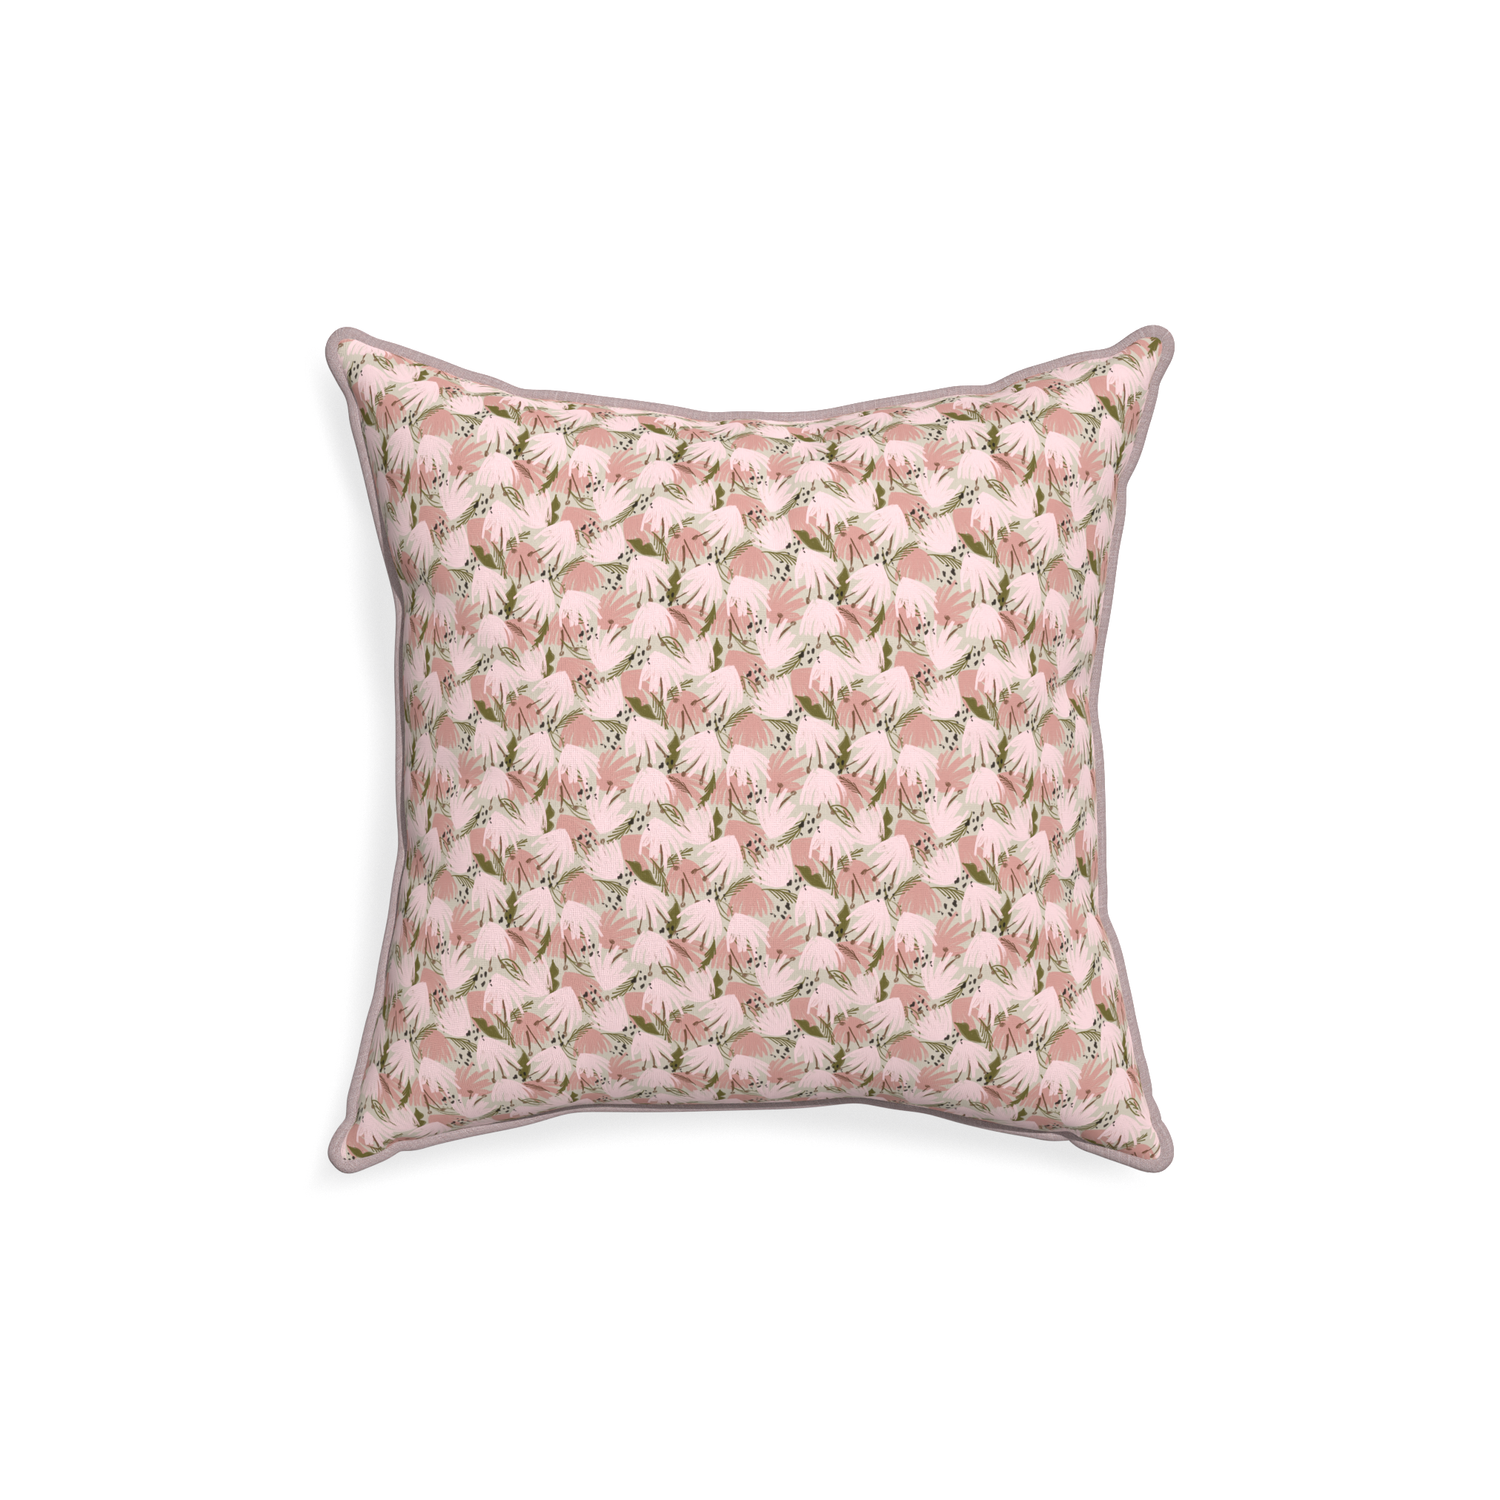 18-square eden pink custom pink floralpillow with orchid piping on white background